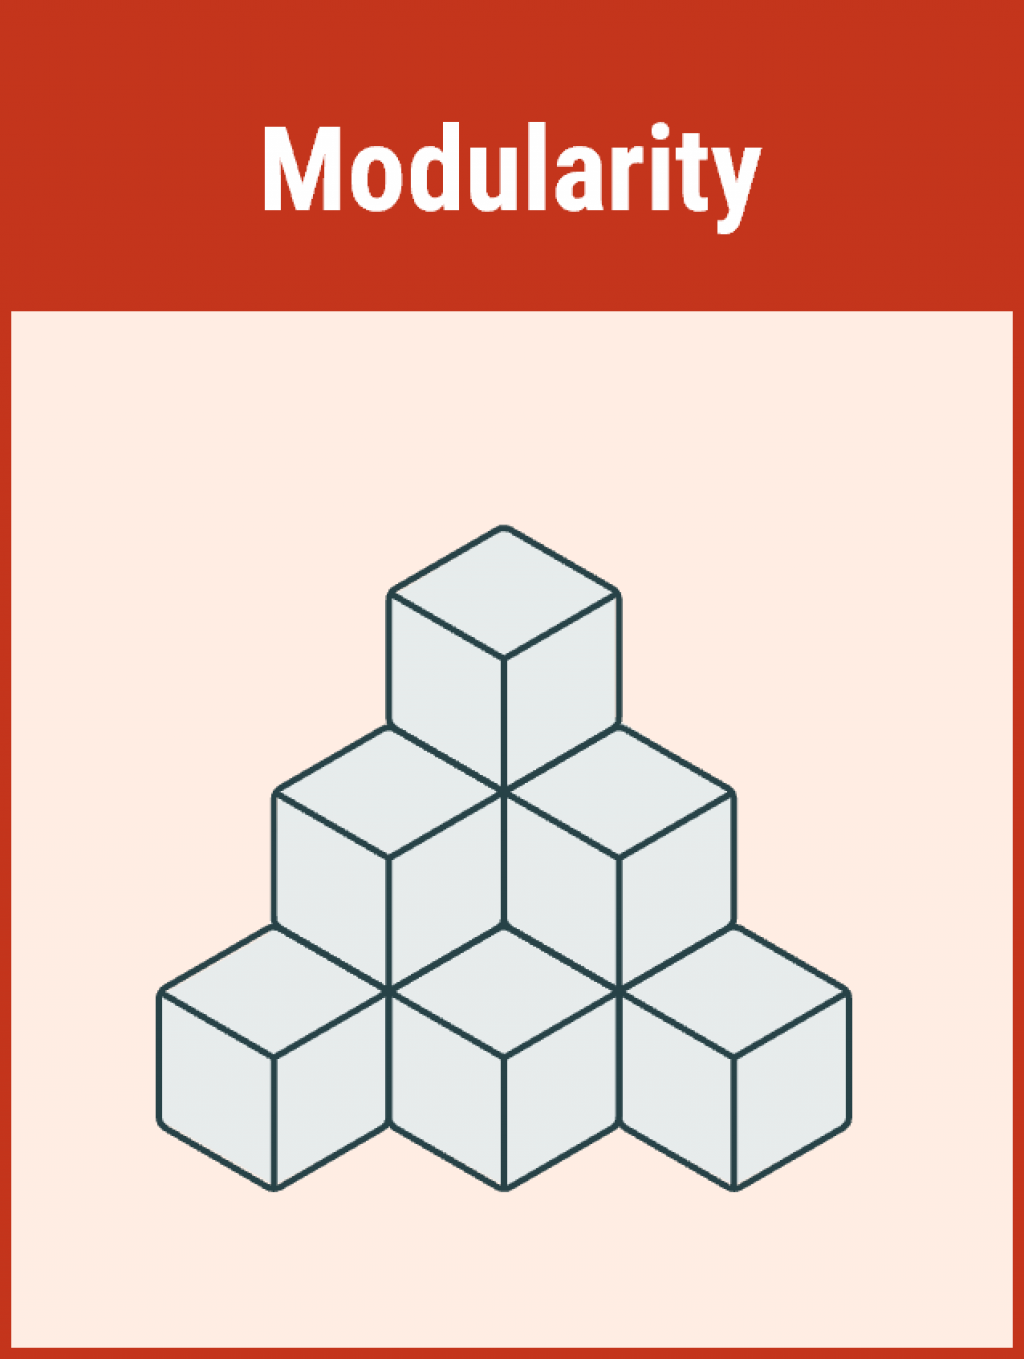 Models should be divided up into reusable modules. Illustration of a pyramid that consists of smaller cubes.  